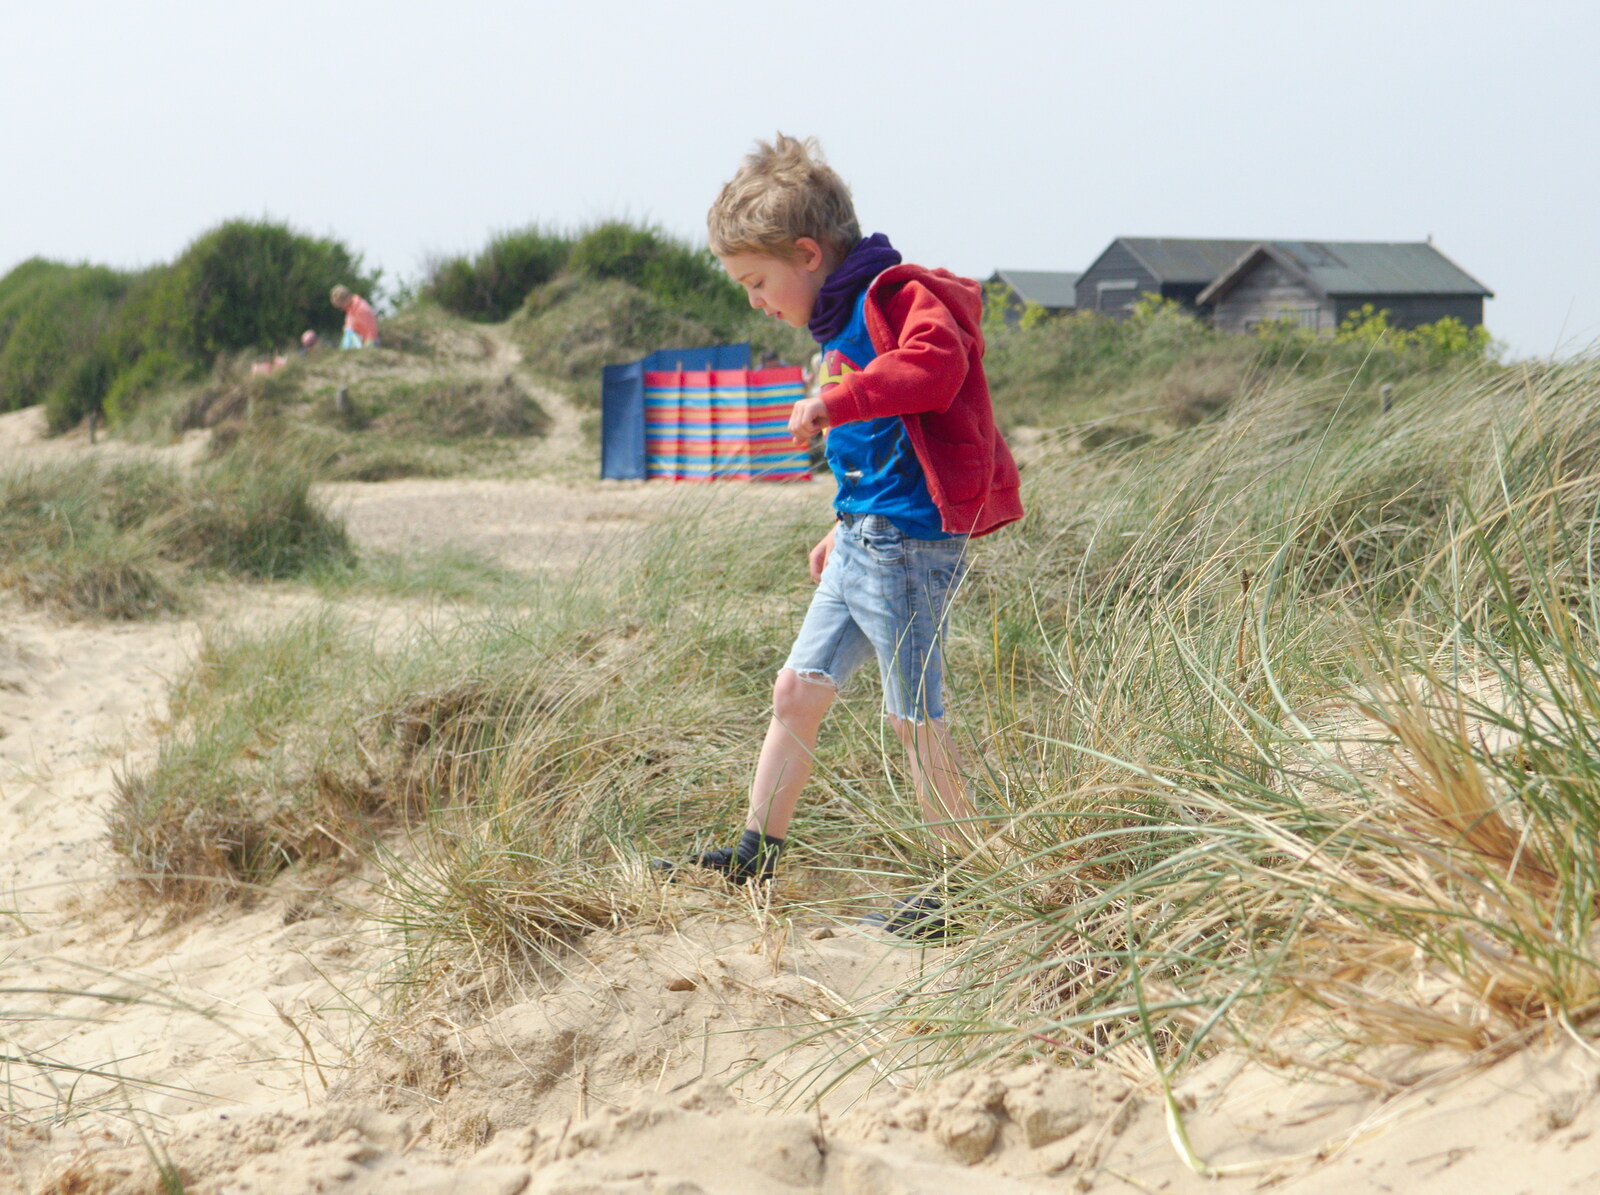 Fred in the dunes from Life's A Windy Beach, Walberswick, Suffolk - 5th May 2014